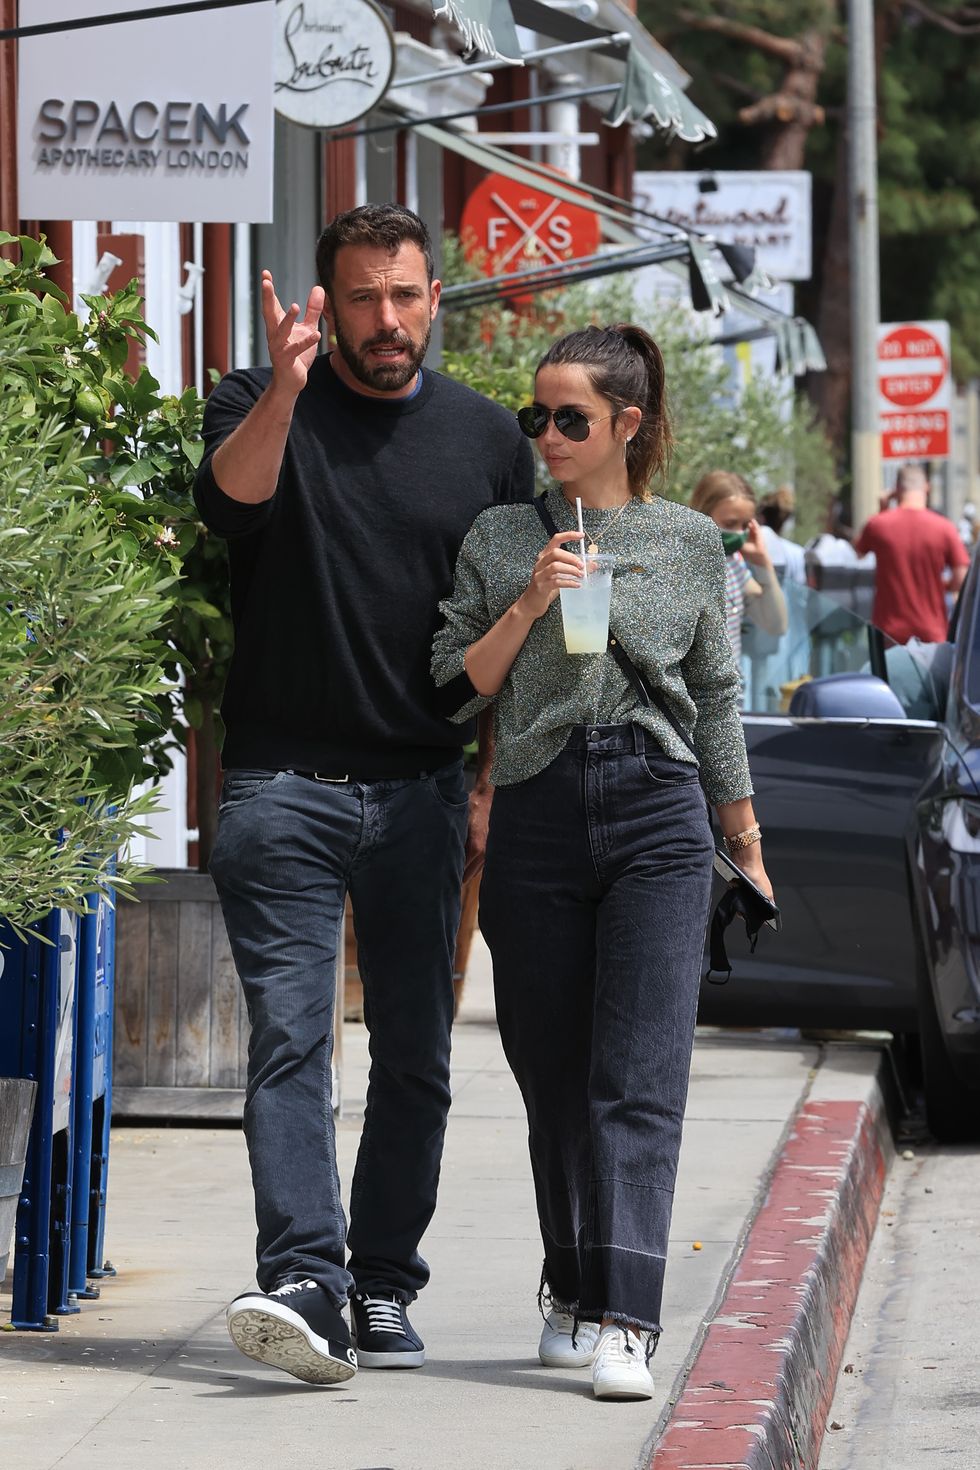 ben affleck and ana de armas appear to be in a serious conversation after enjoying lunch together in los angeles 20 jun 2020 pictured ben affleck and ana de armas enjoy lunch together photo credit rachpootmega themegaagencycom 1 888 505 6342 mega agency tagid mega682449009jpg photo via mega agency